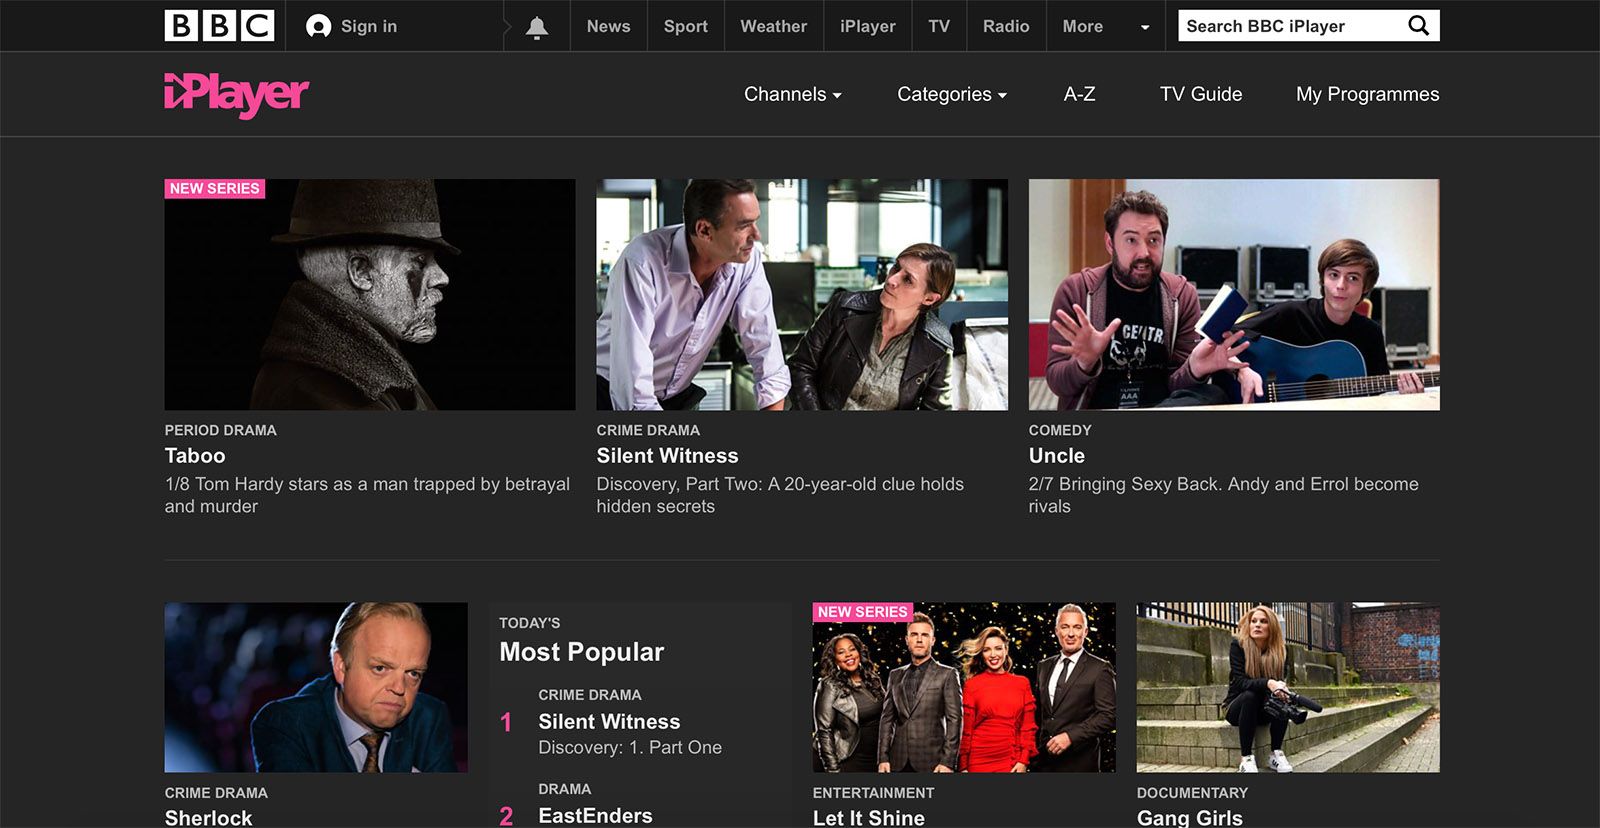 bbc iplayer will reinvent itself by 2020 to be number one online tv service in the uk  image 1